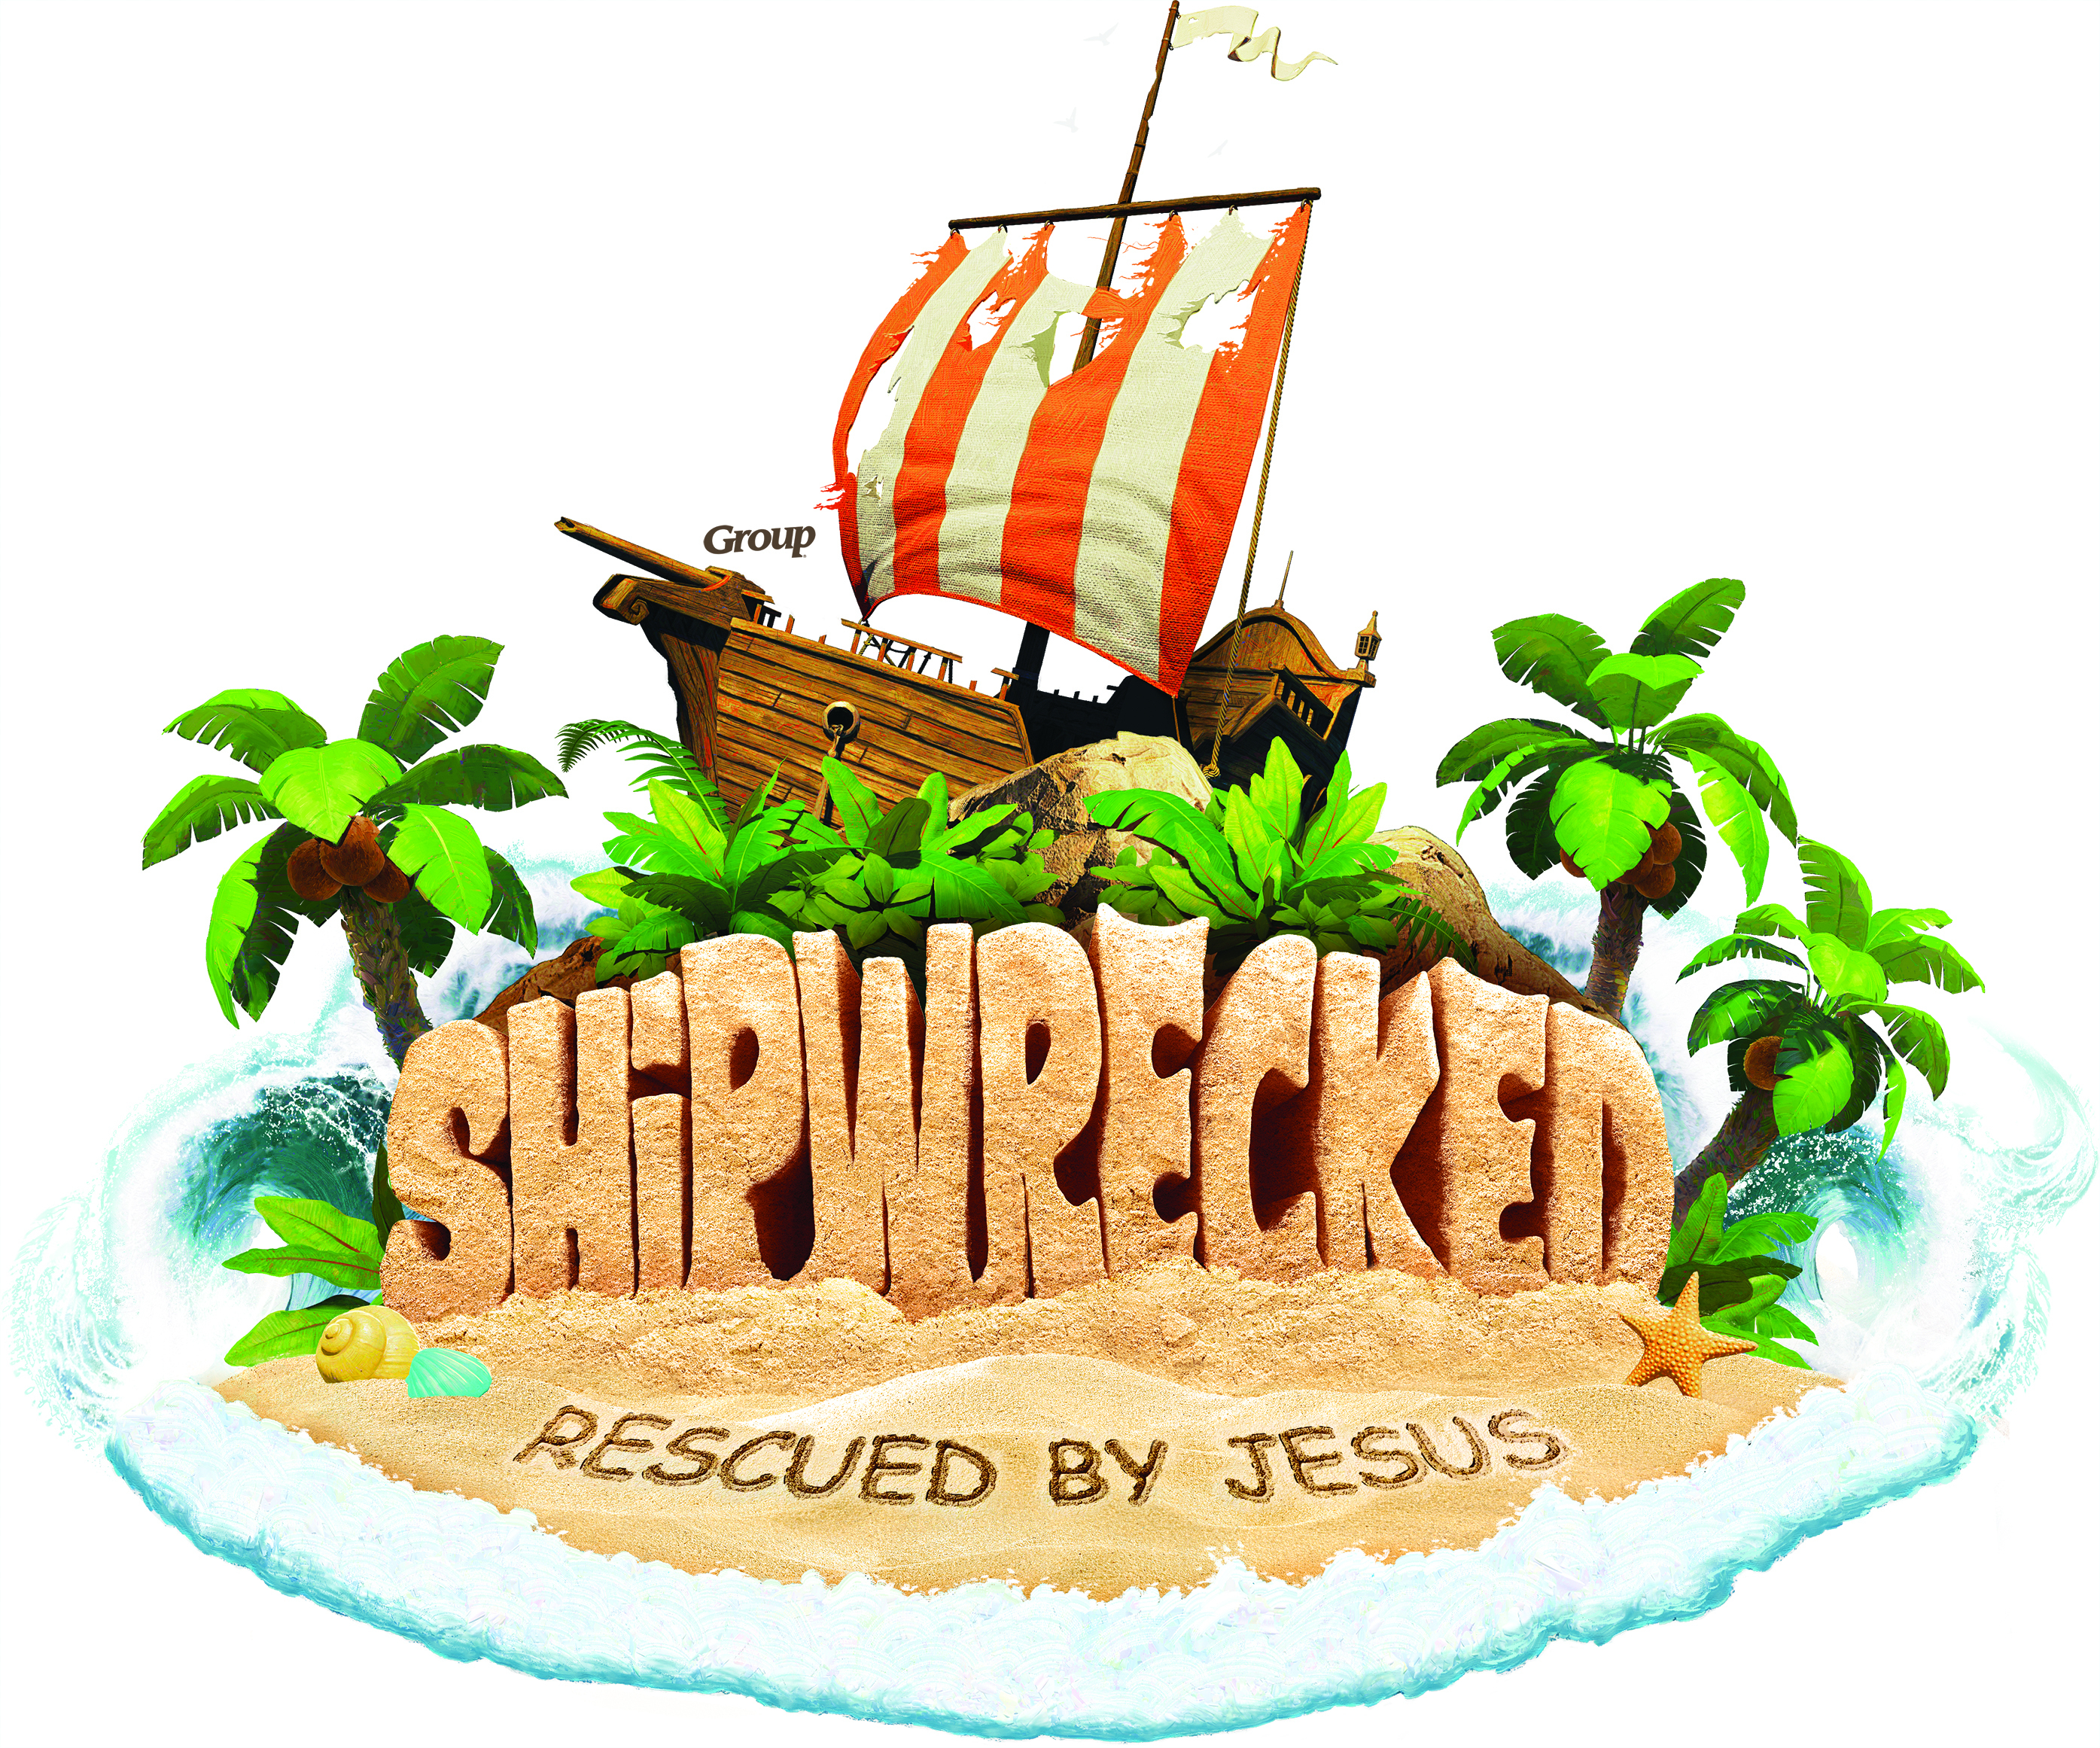 Shipwrecked Vbs | Free Resources &amp;amp; Downloads - Free Printable Vacation Bible School Materials